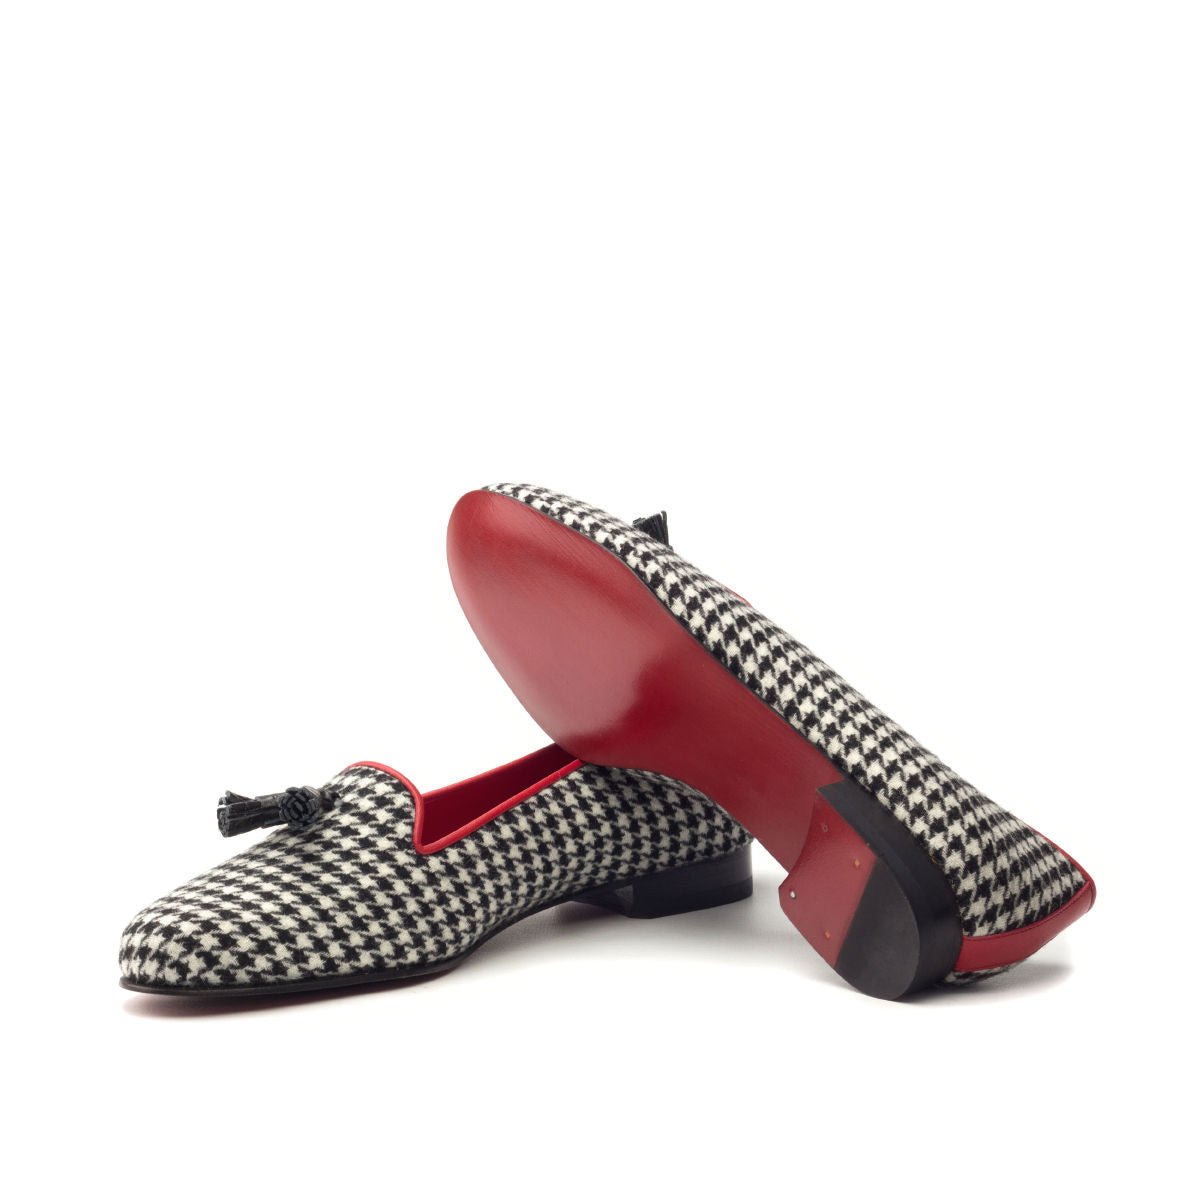 Women's Moitié Houndstooth Smoking Slippers with Red Accents - Maison de Kingsley Couture Harmonie et Fureur Spain